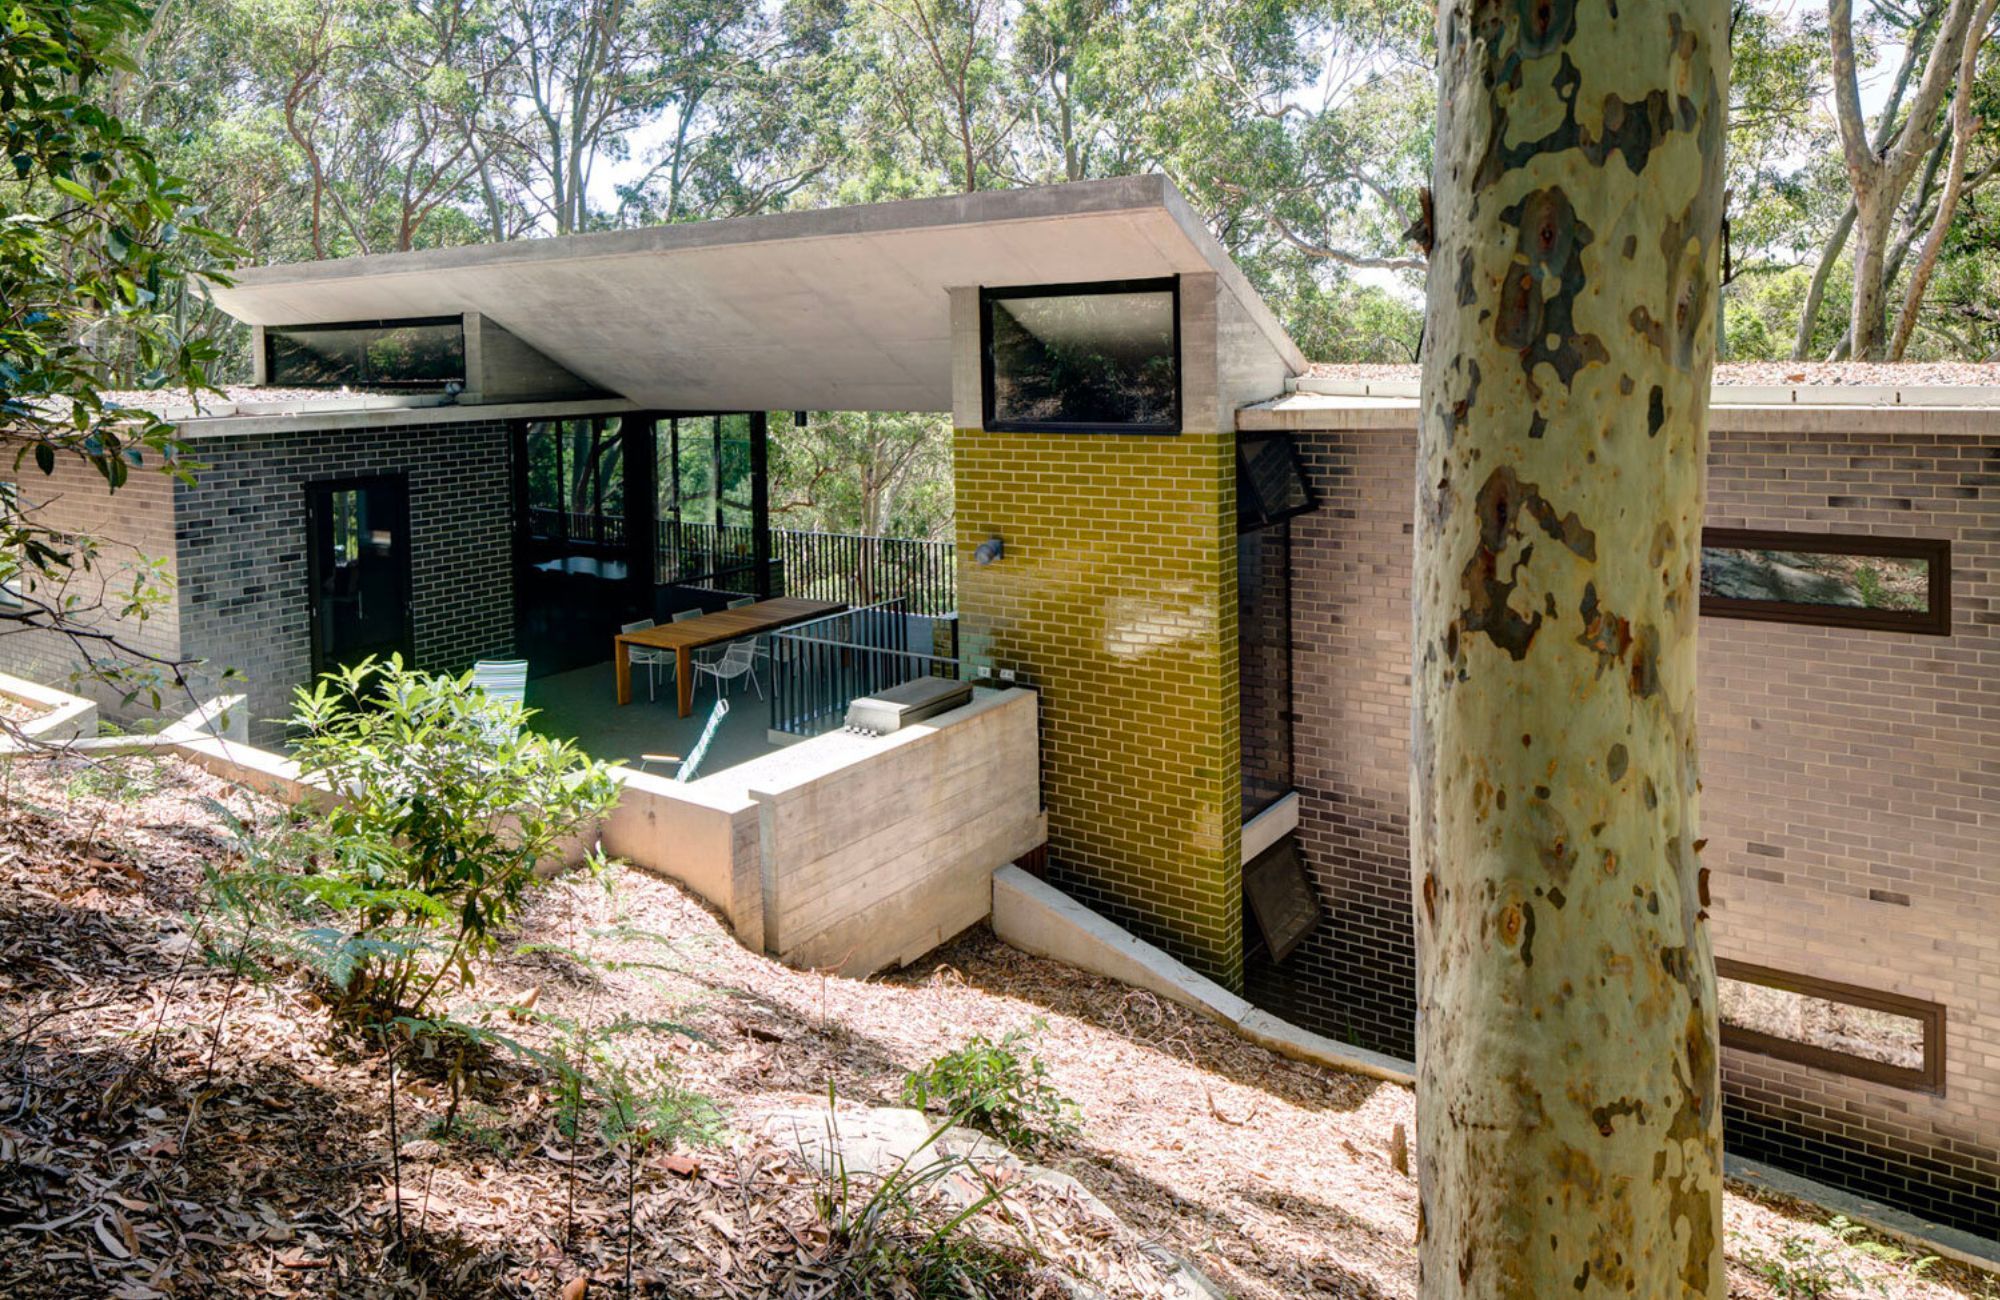 Pretty Beach House by Lahznimmo showing house in bushland setting